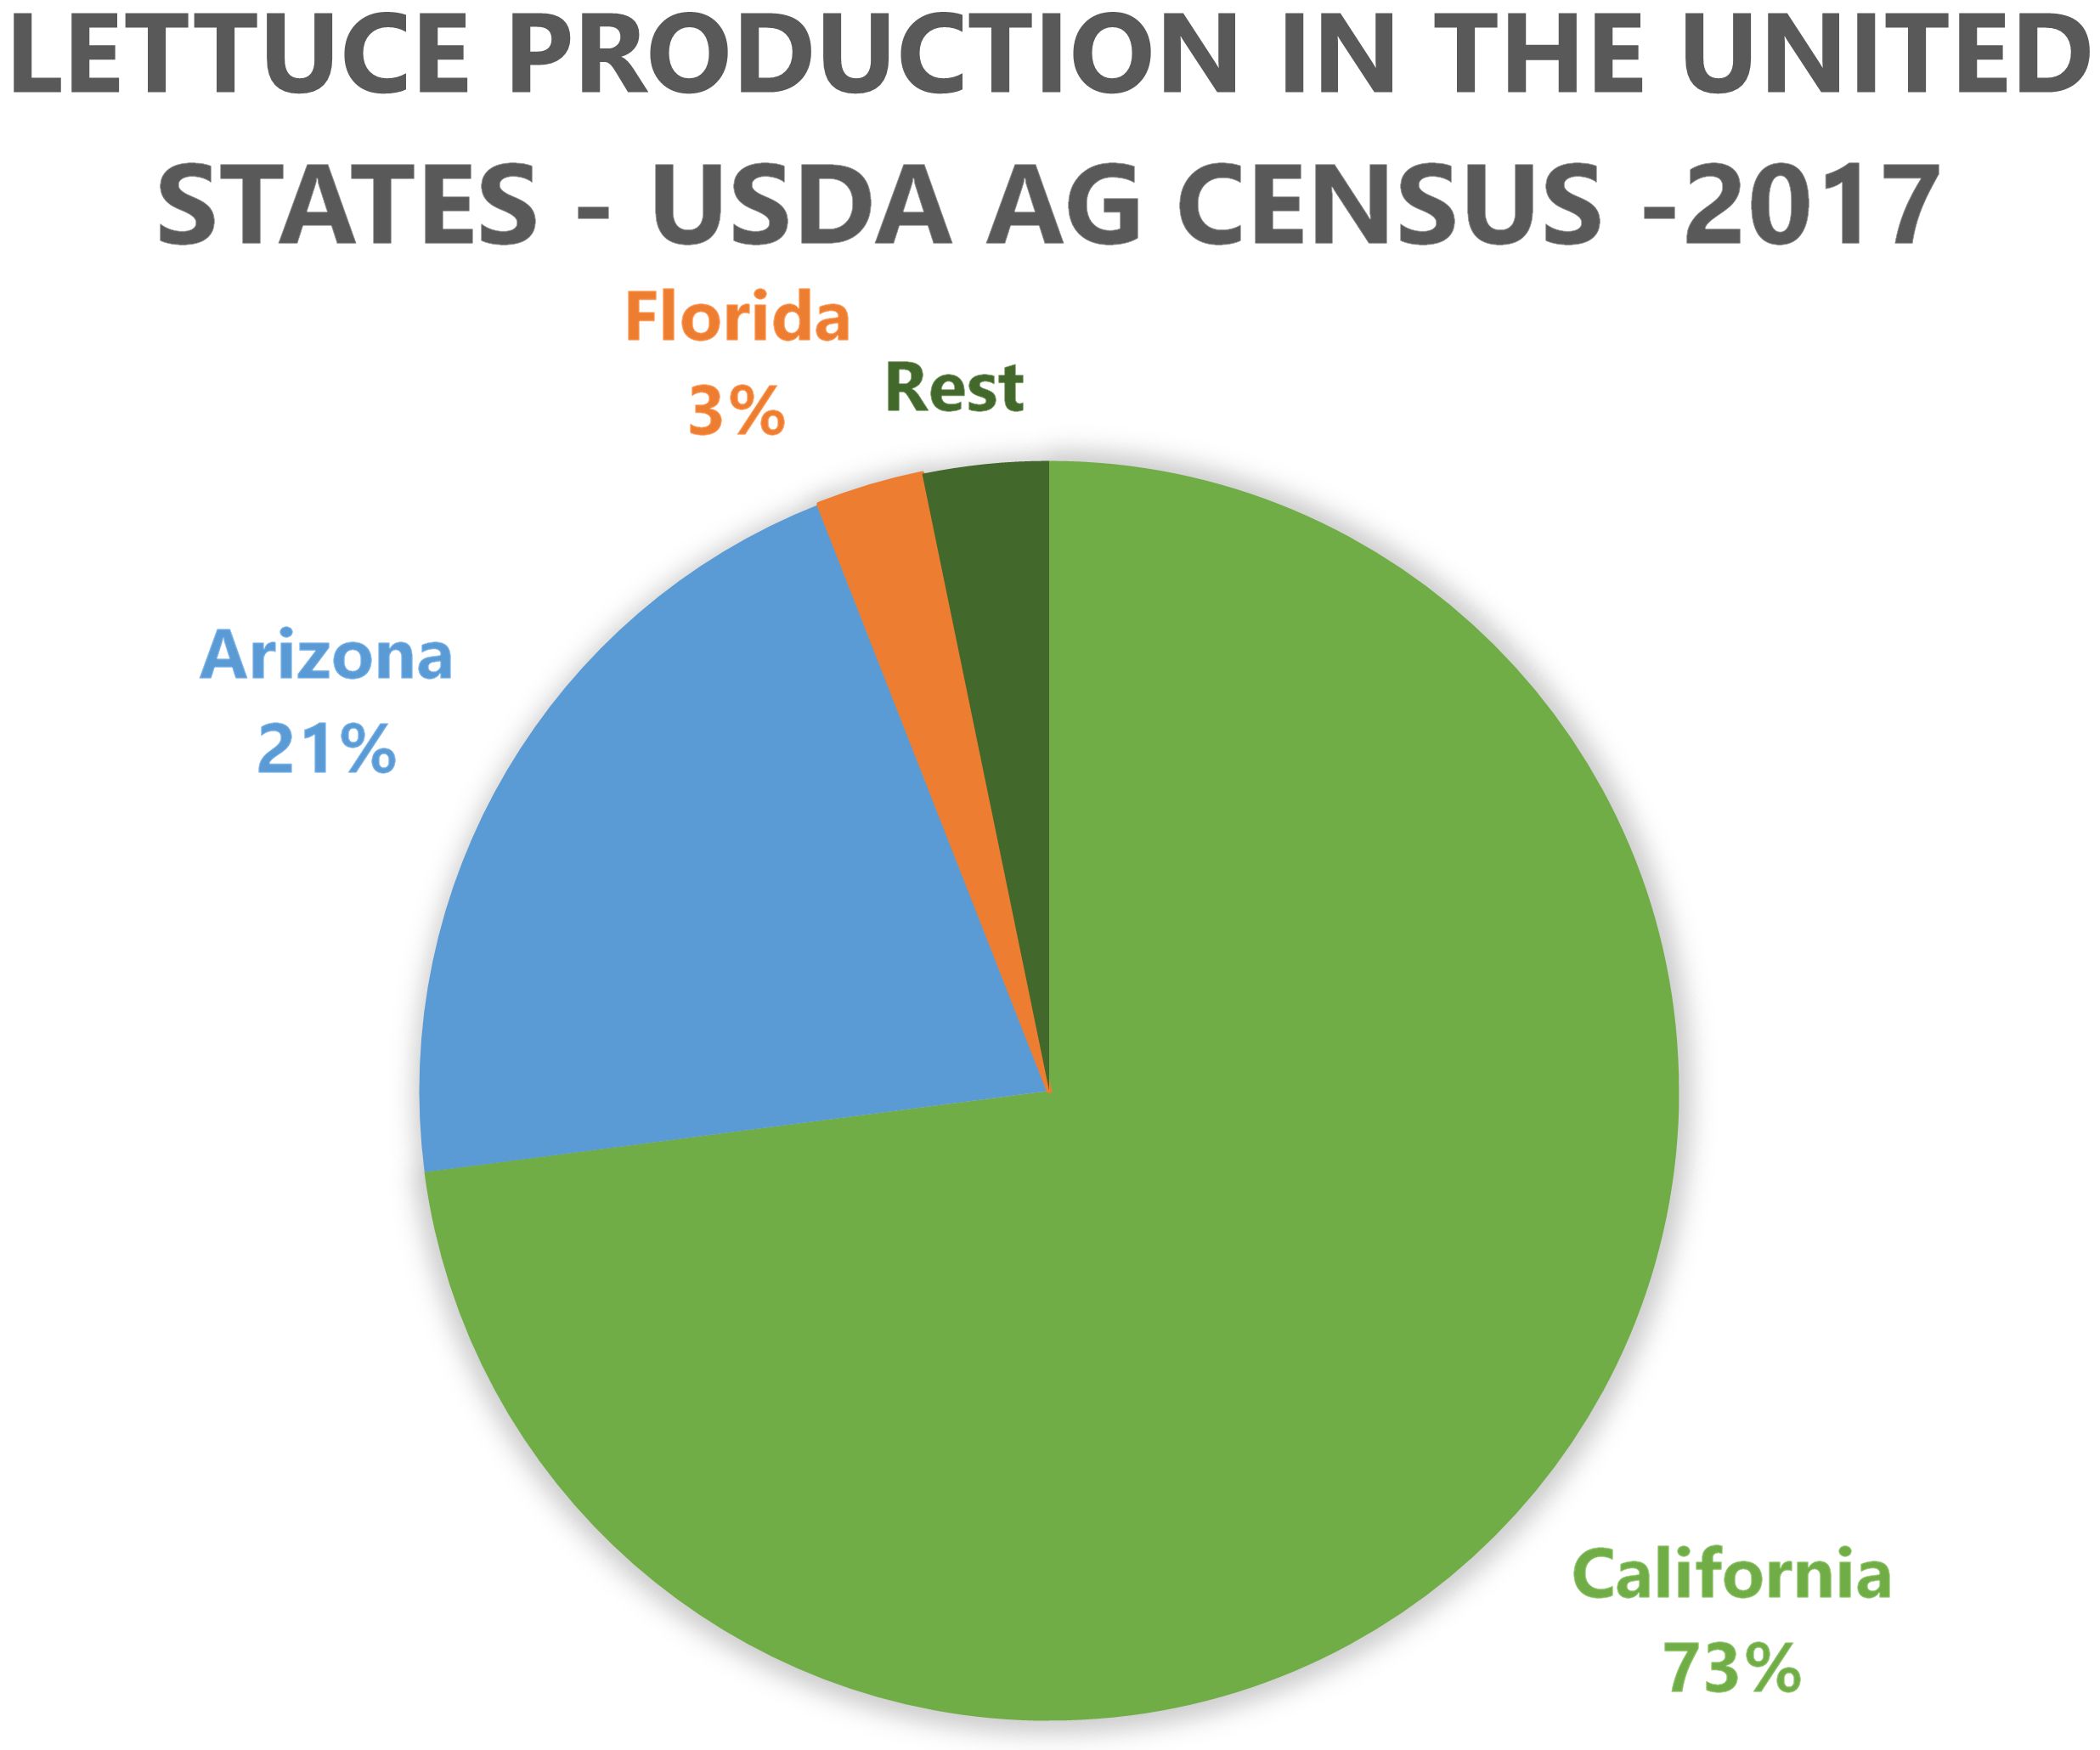 Proportion of lettuce planted in the United States according to the USDA AG Census in 2017.